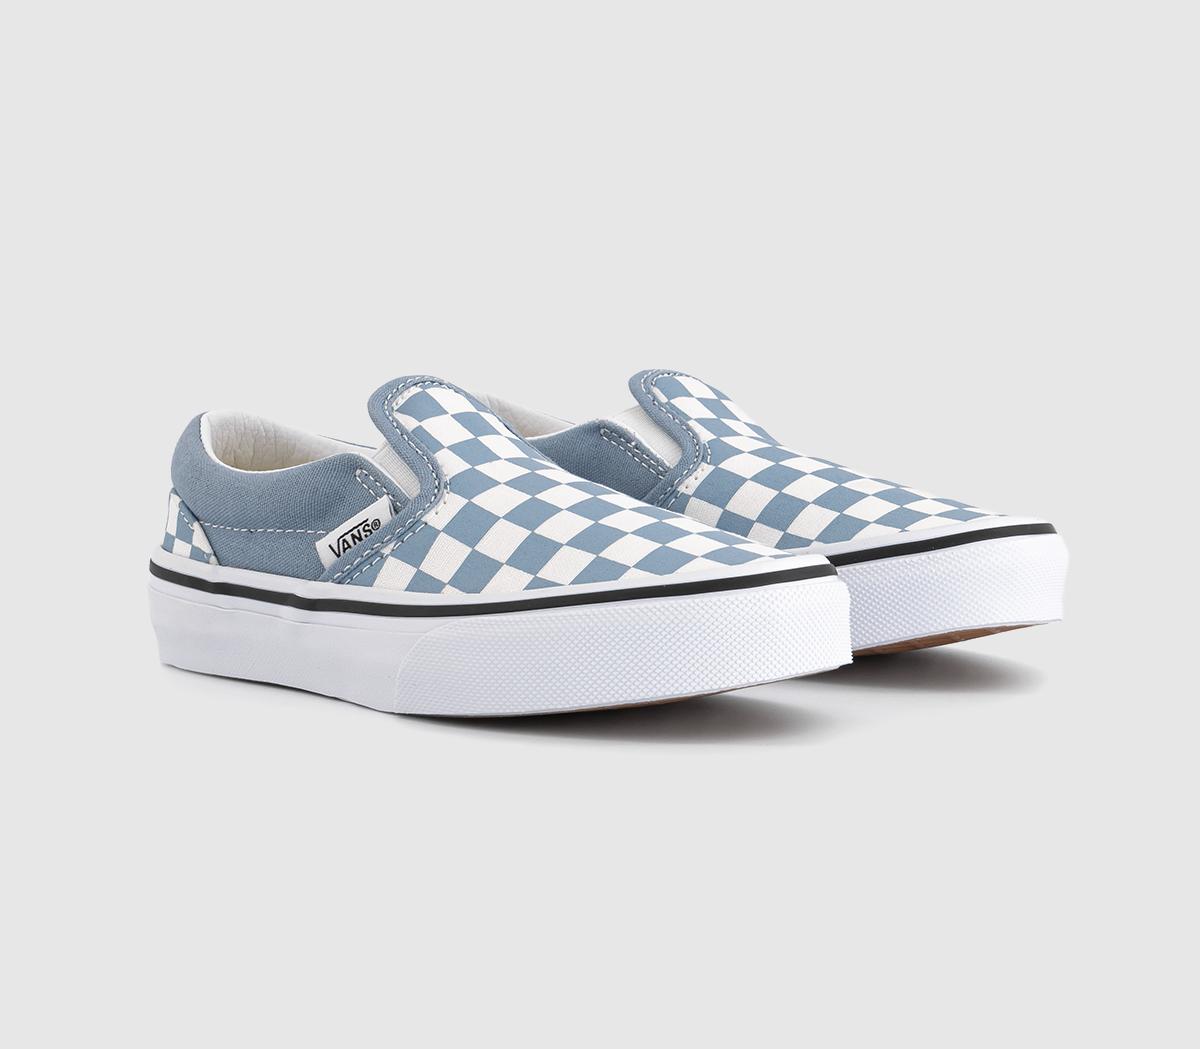 Vans Classic Slip On Kids Color Theory Checkerboard Dusty Blue, 13 Youth